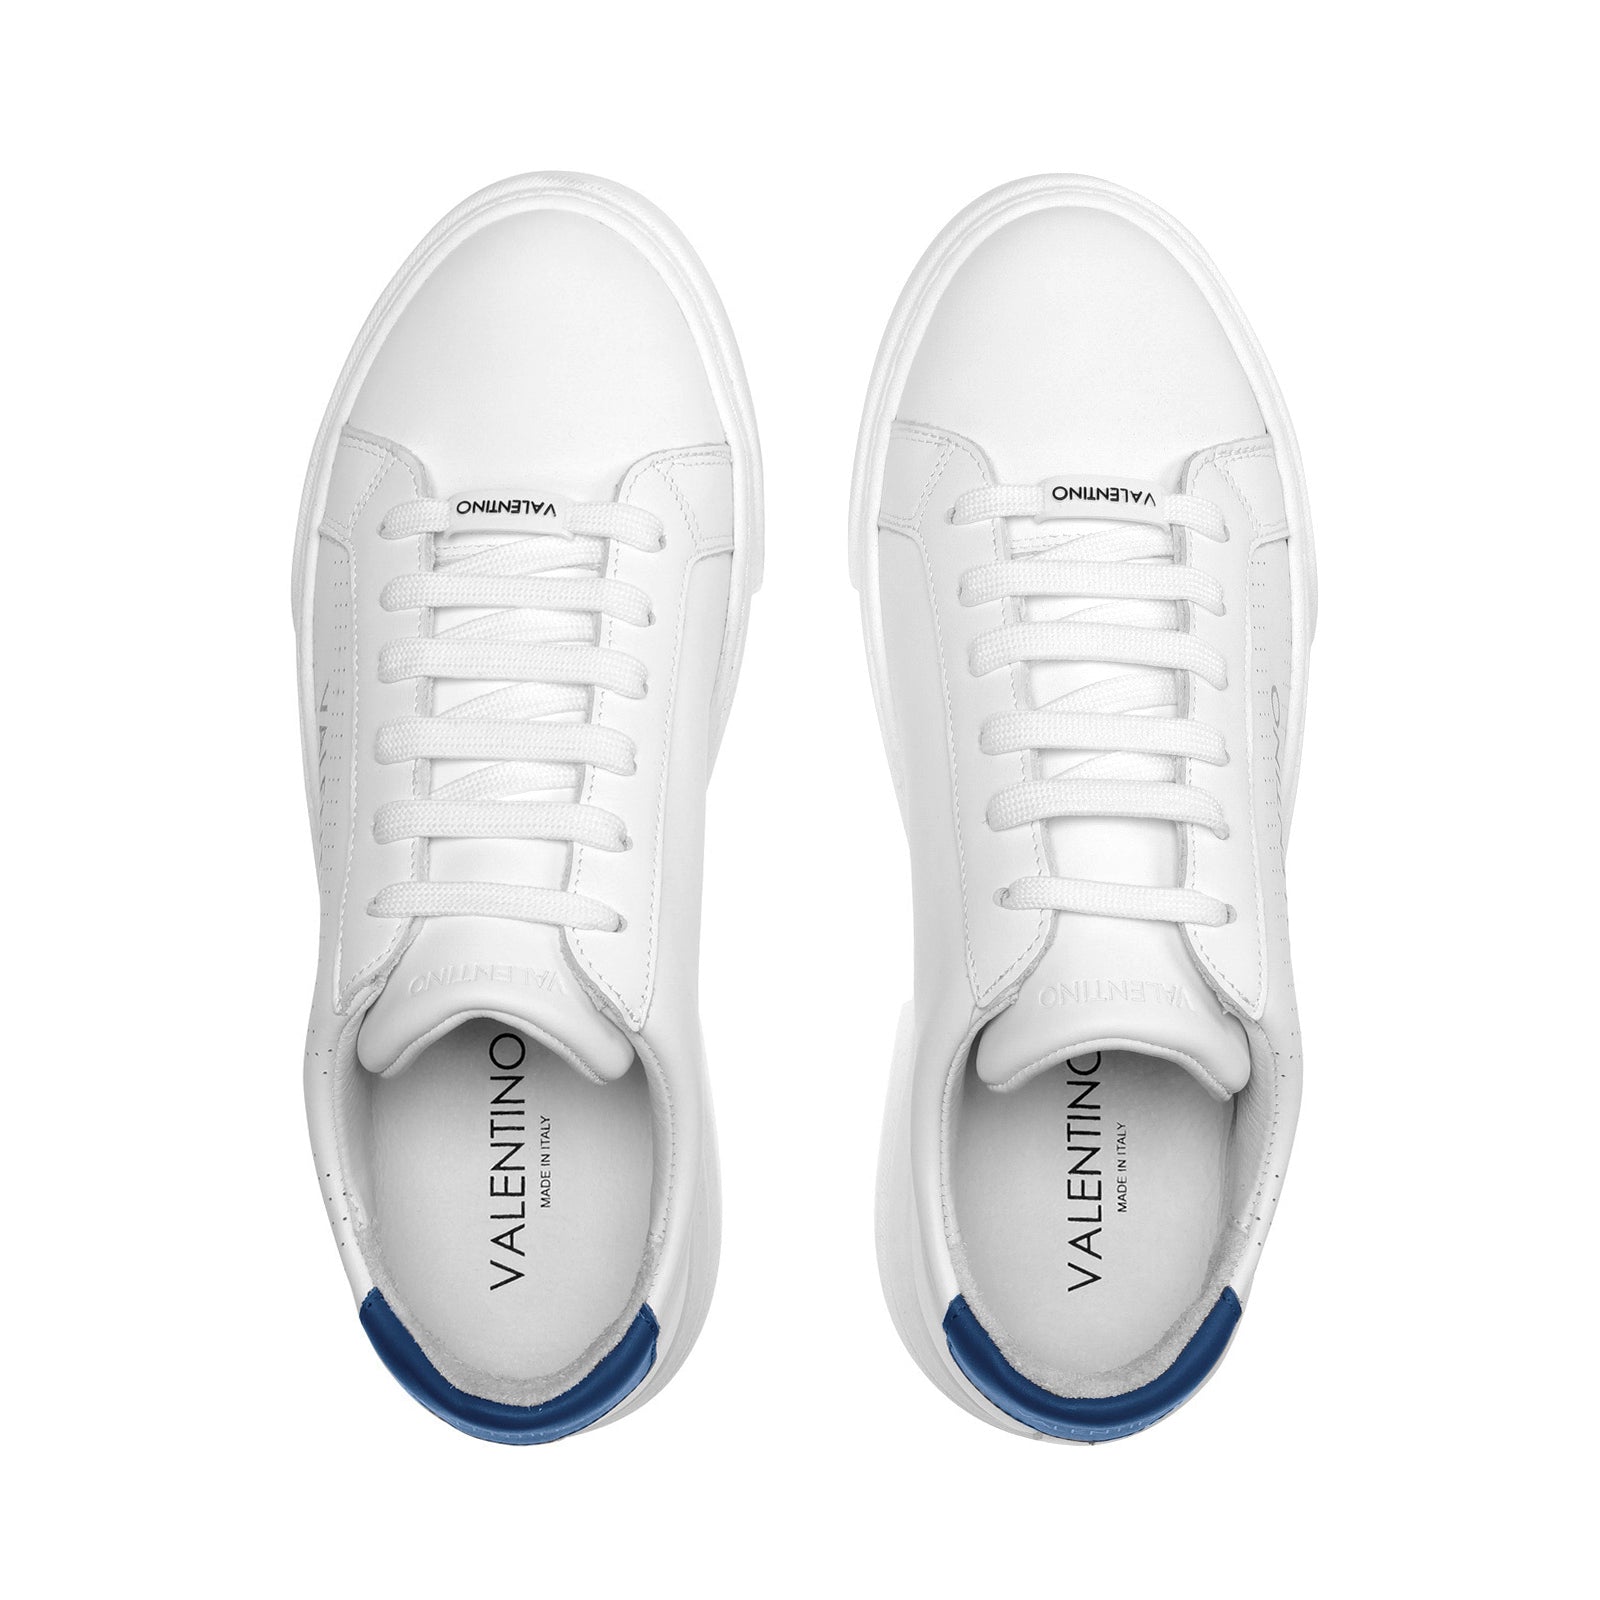 Stjerne Ti snap Valentino Sneakers for Men in White and Blue Leather I Made in Italy –  Valentino Shoes